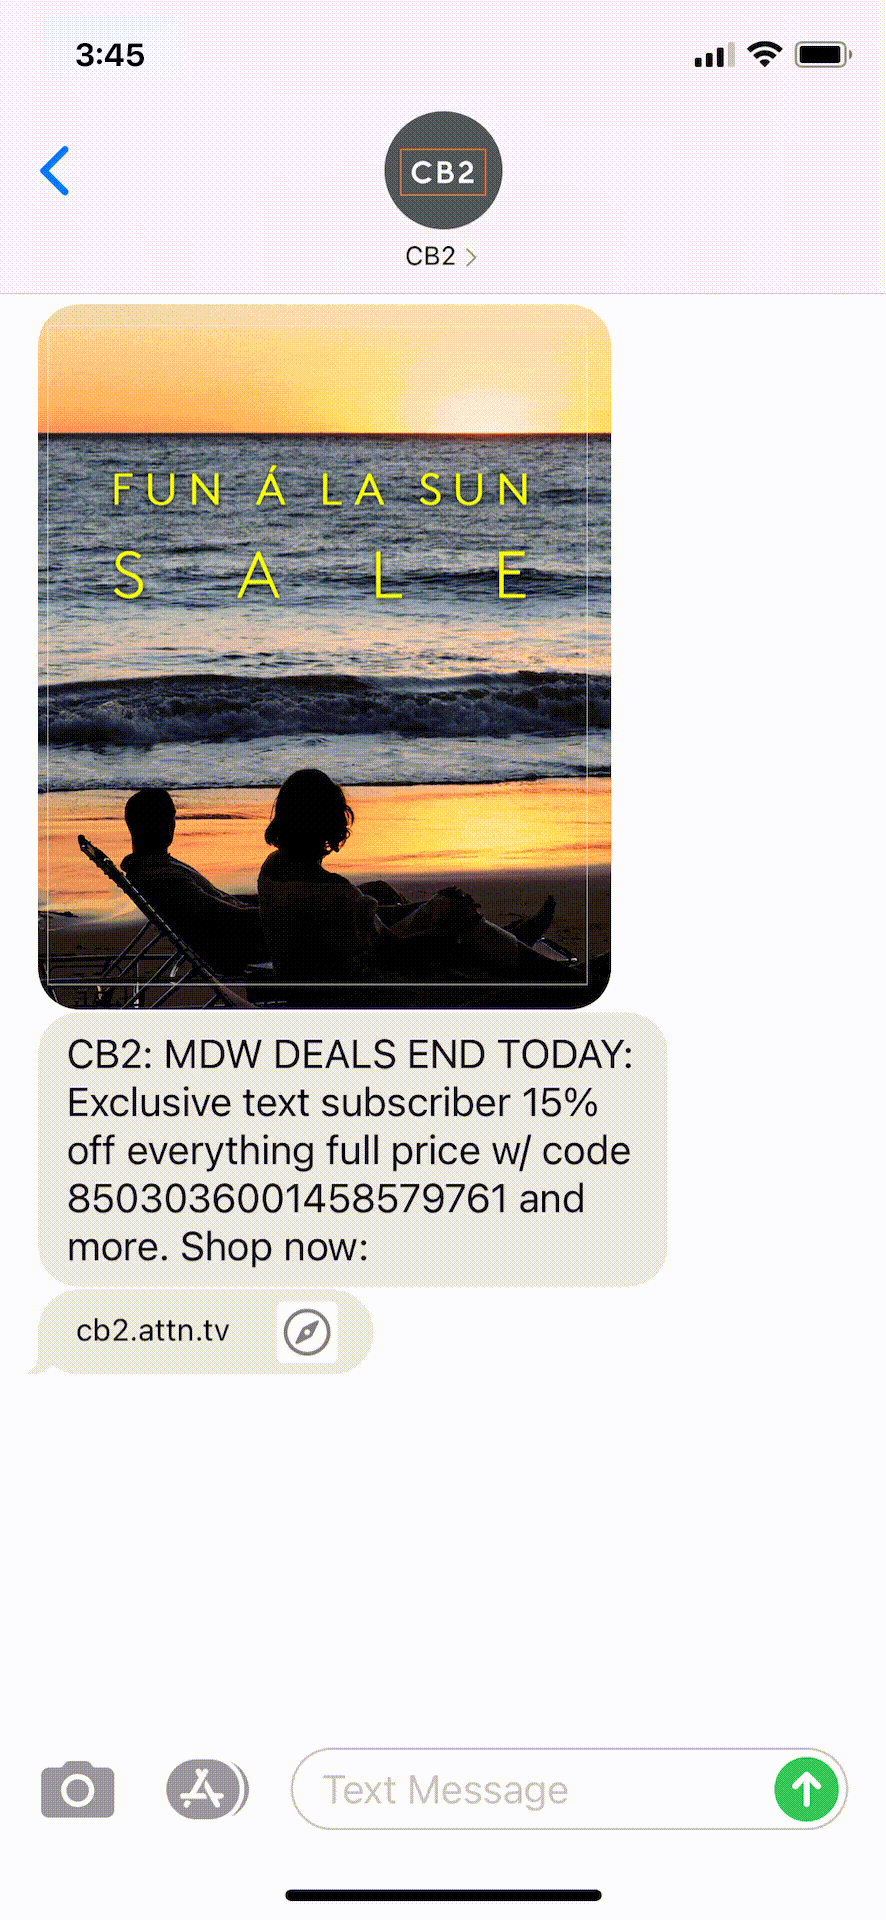 CB2-Text-Message-Marketing-Example-05.31.2021